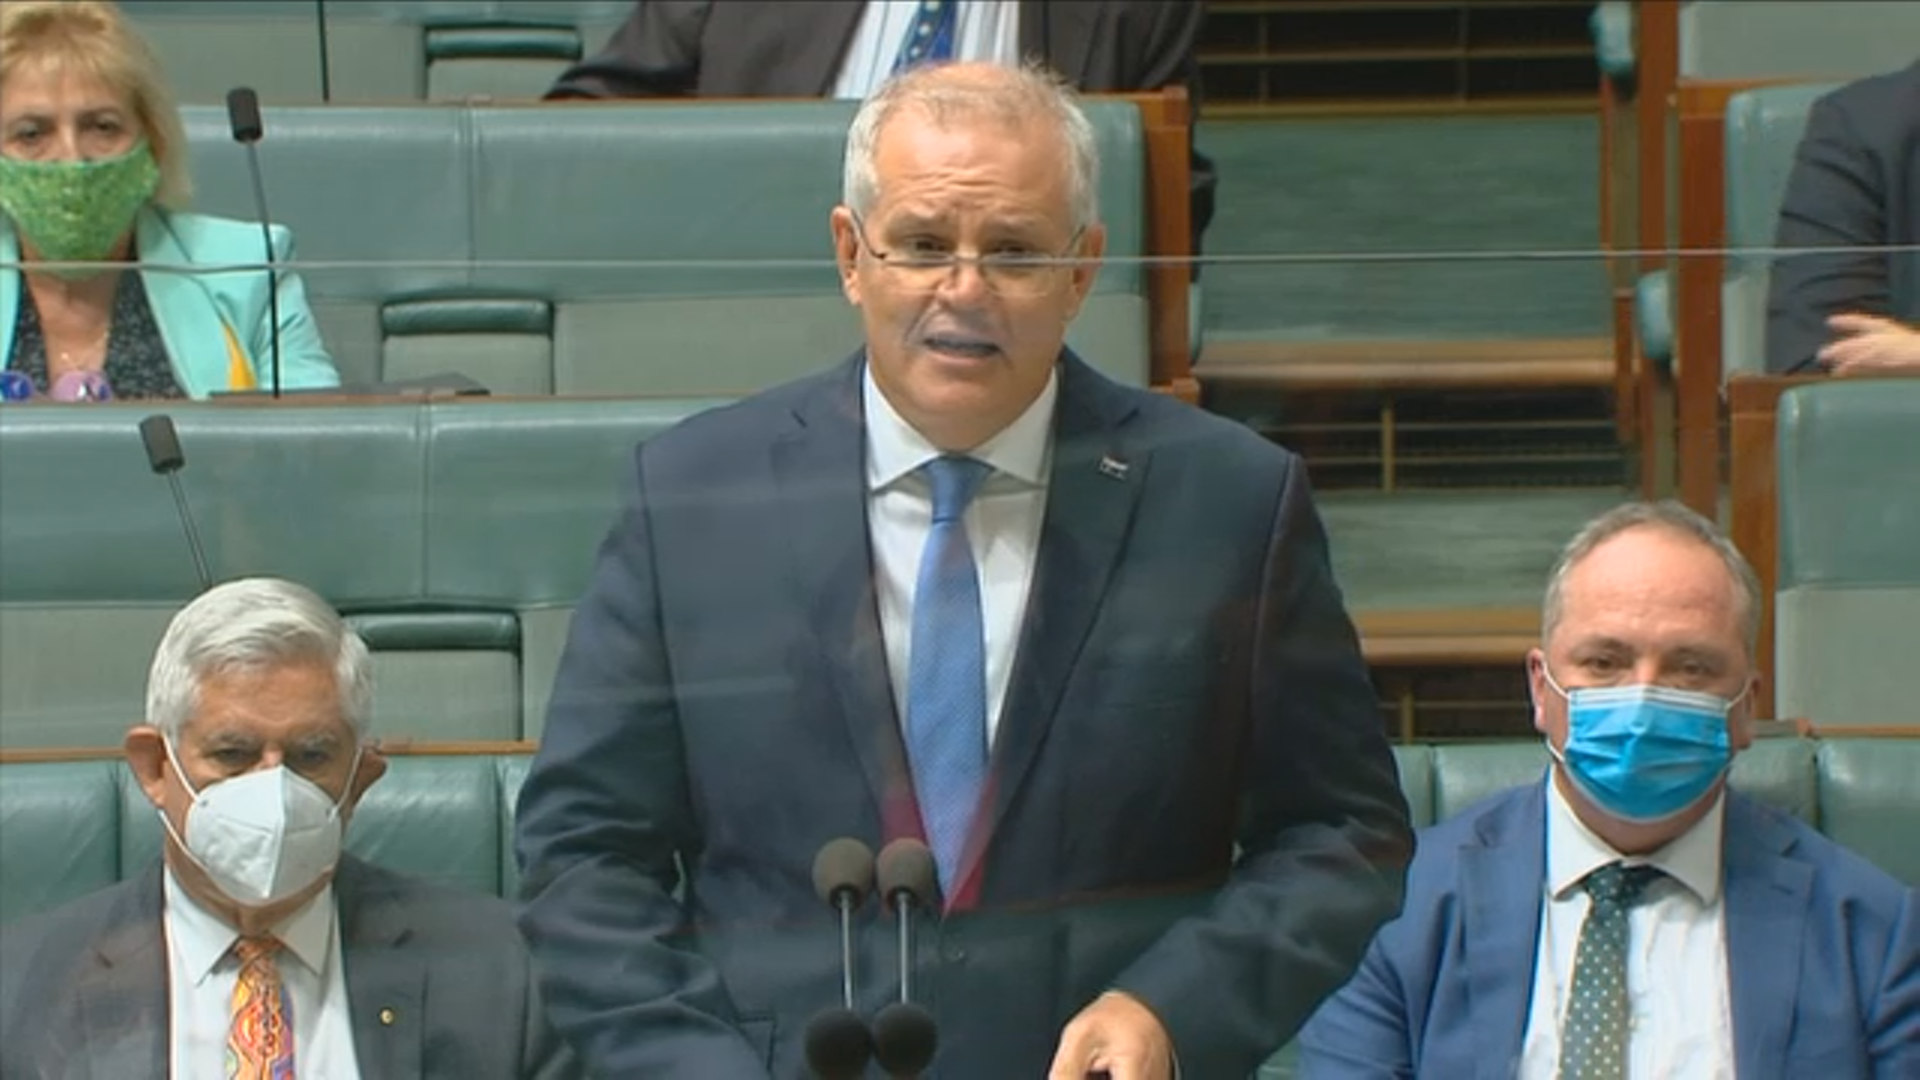 “How dare you”: PM’s ‘apology’ to Stolen Generations slammed